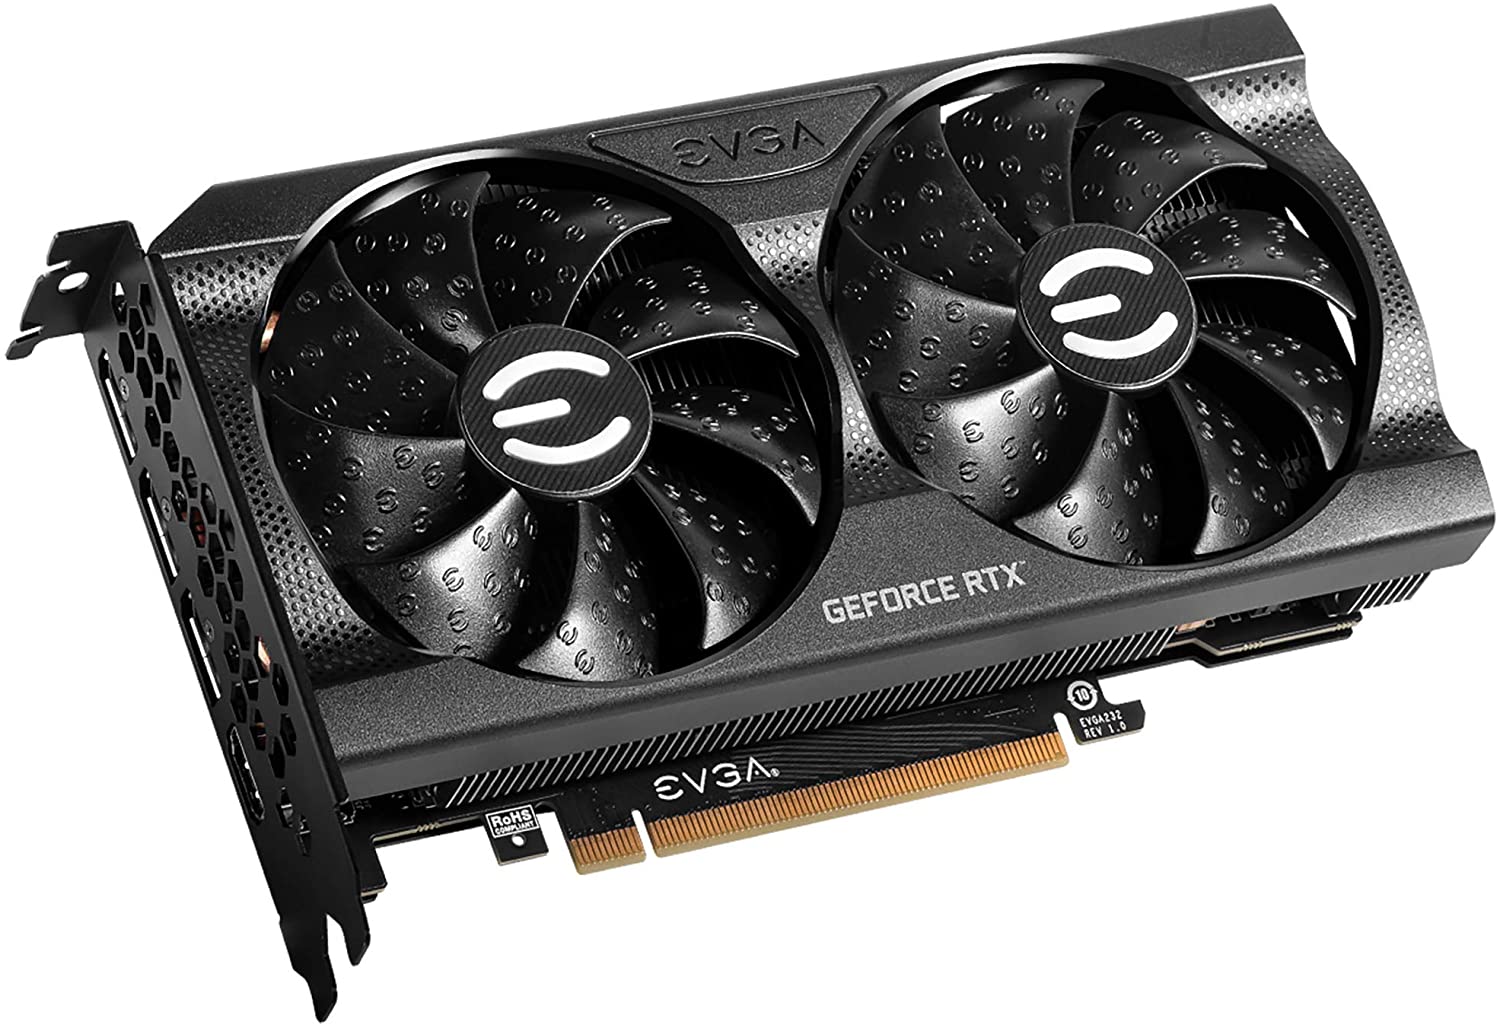 EVGA NVIDIA GeForce RTX 3060 XC Restock Spotted for Just $47.76 Past SRP | Scalper Prices Ending?